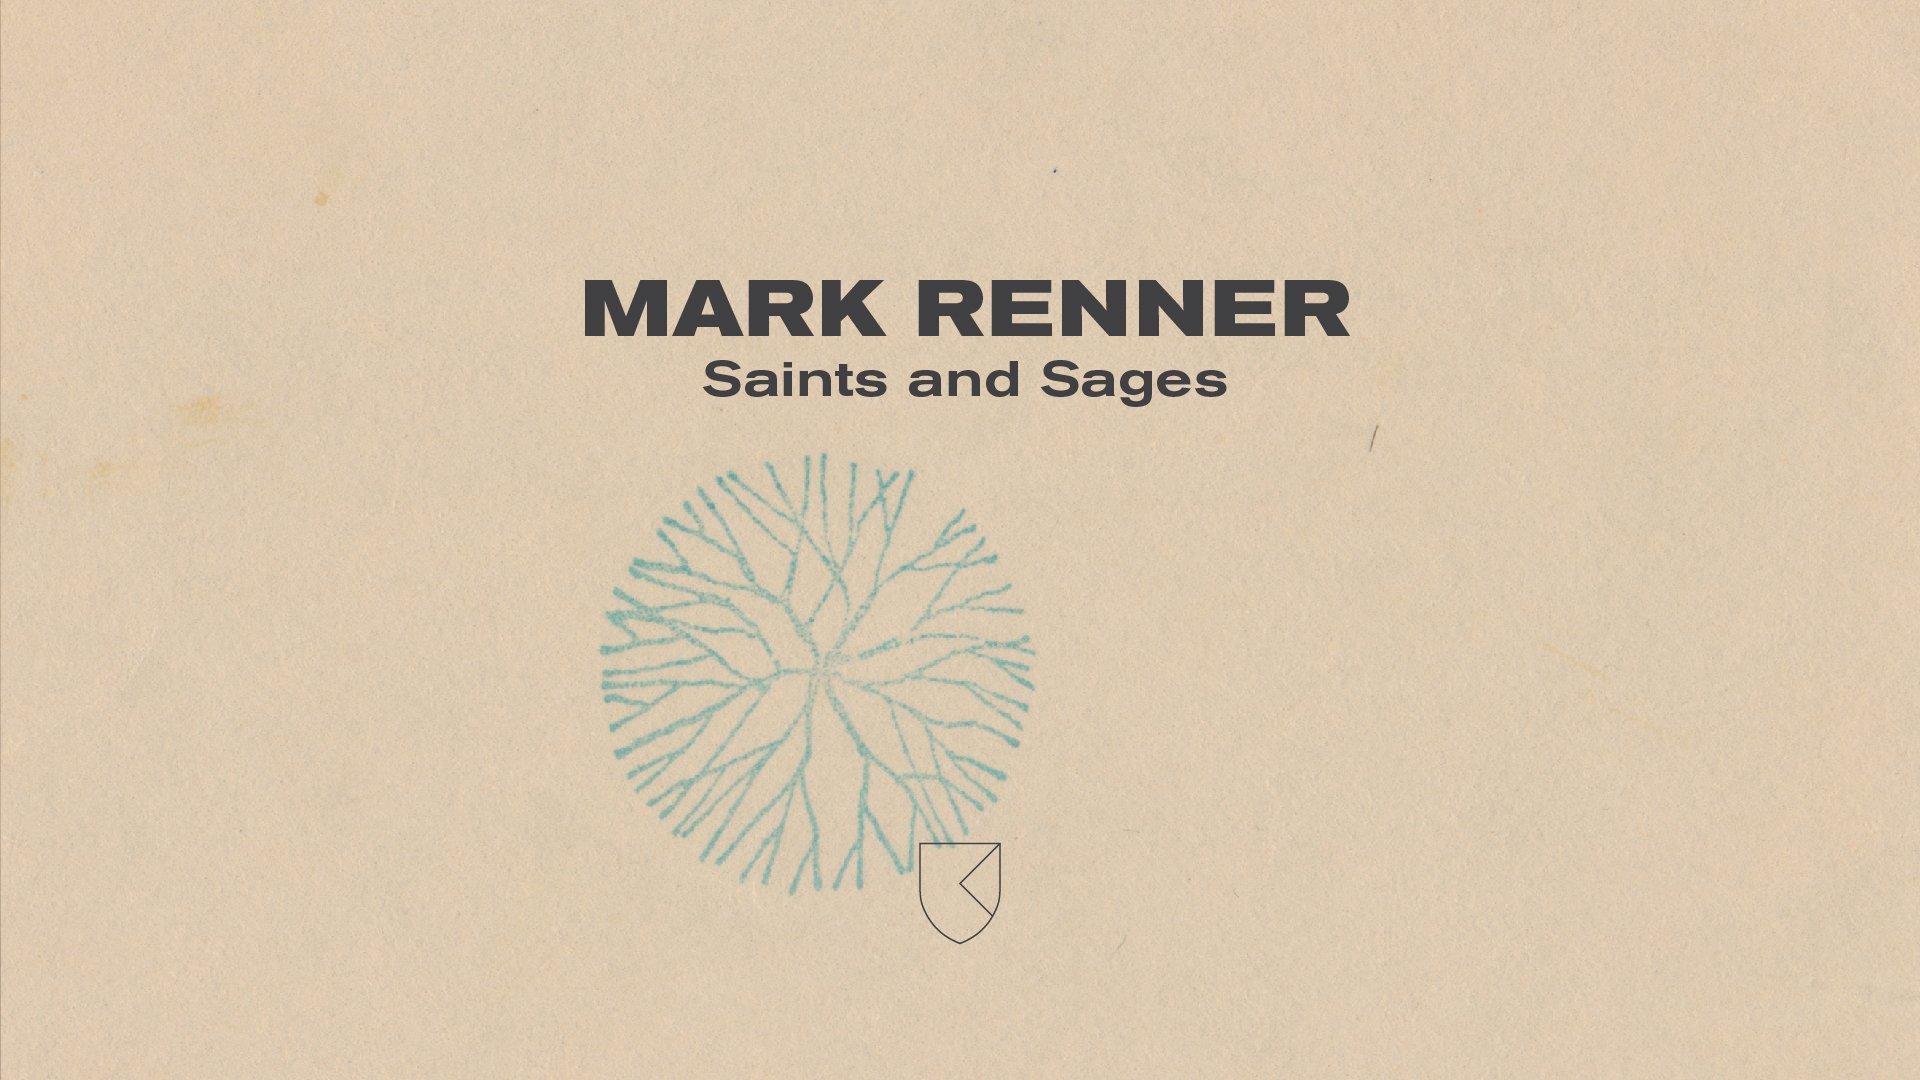 Link to Video for Mark Renner – Saints and Sages